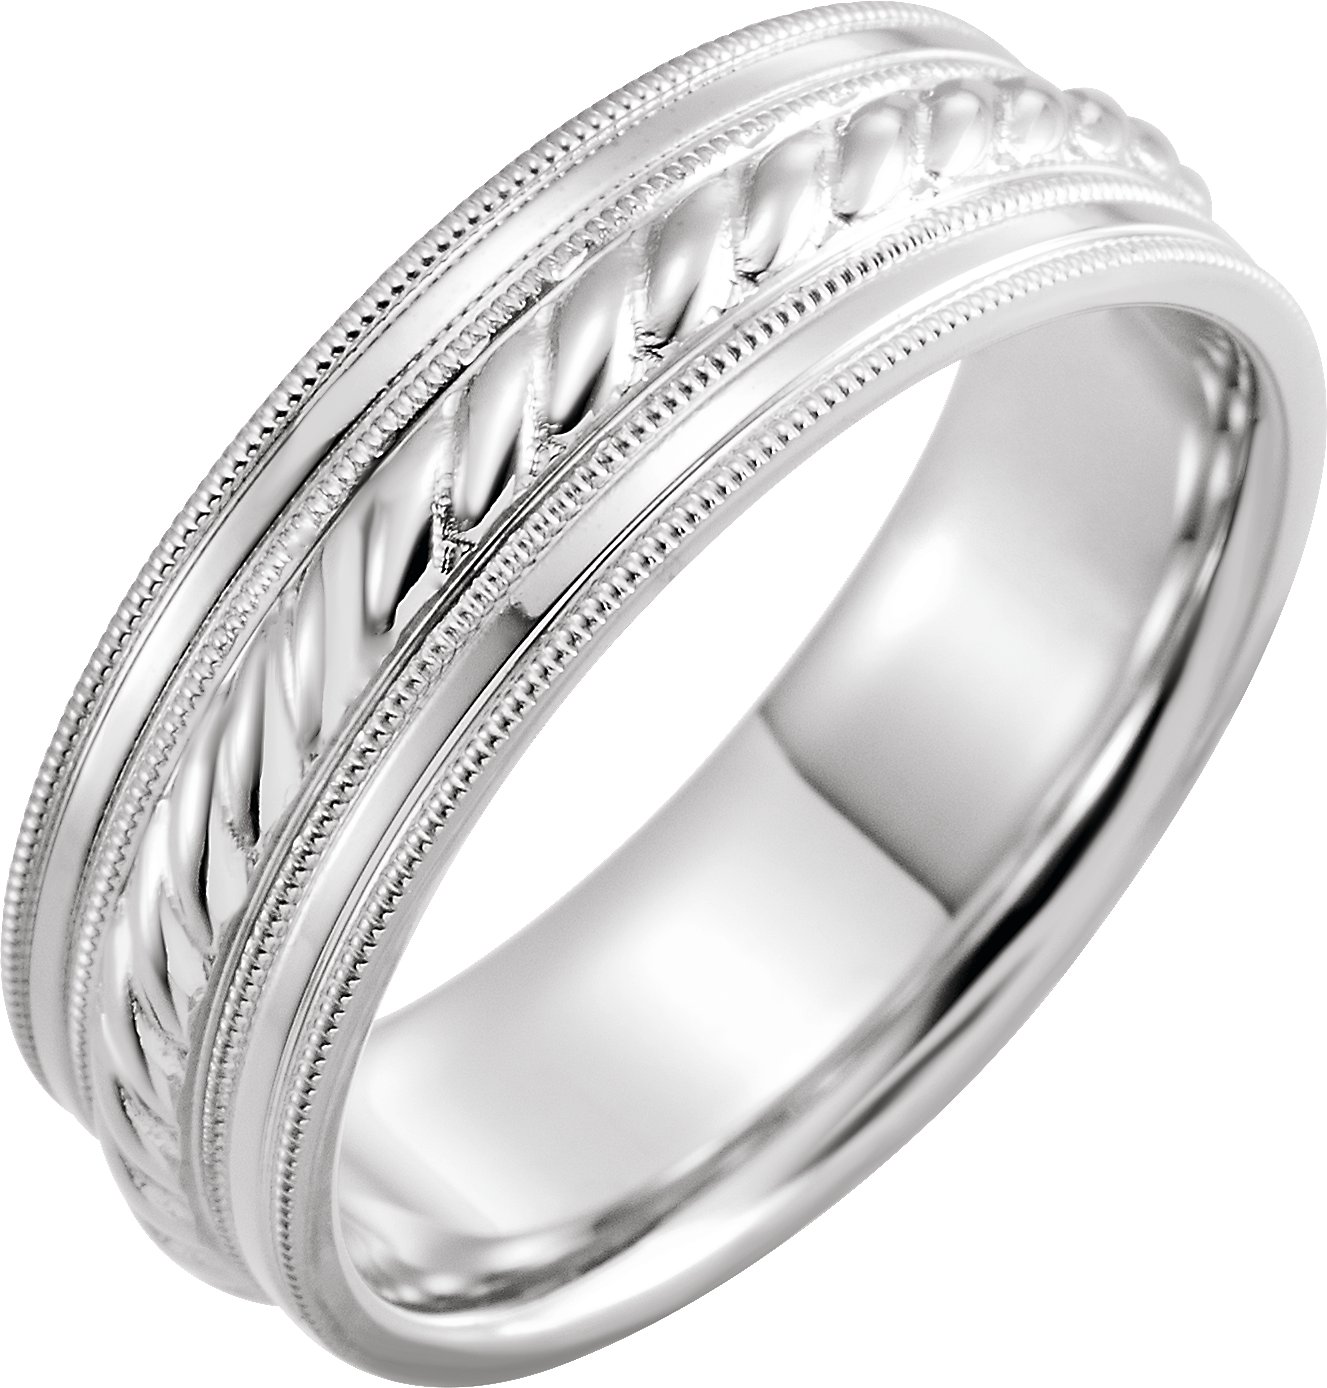 Continuum Sterling Silver 7 mm Rope Pattern Band with Milgrain Size 14.5 Ref 16526457